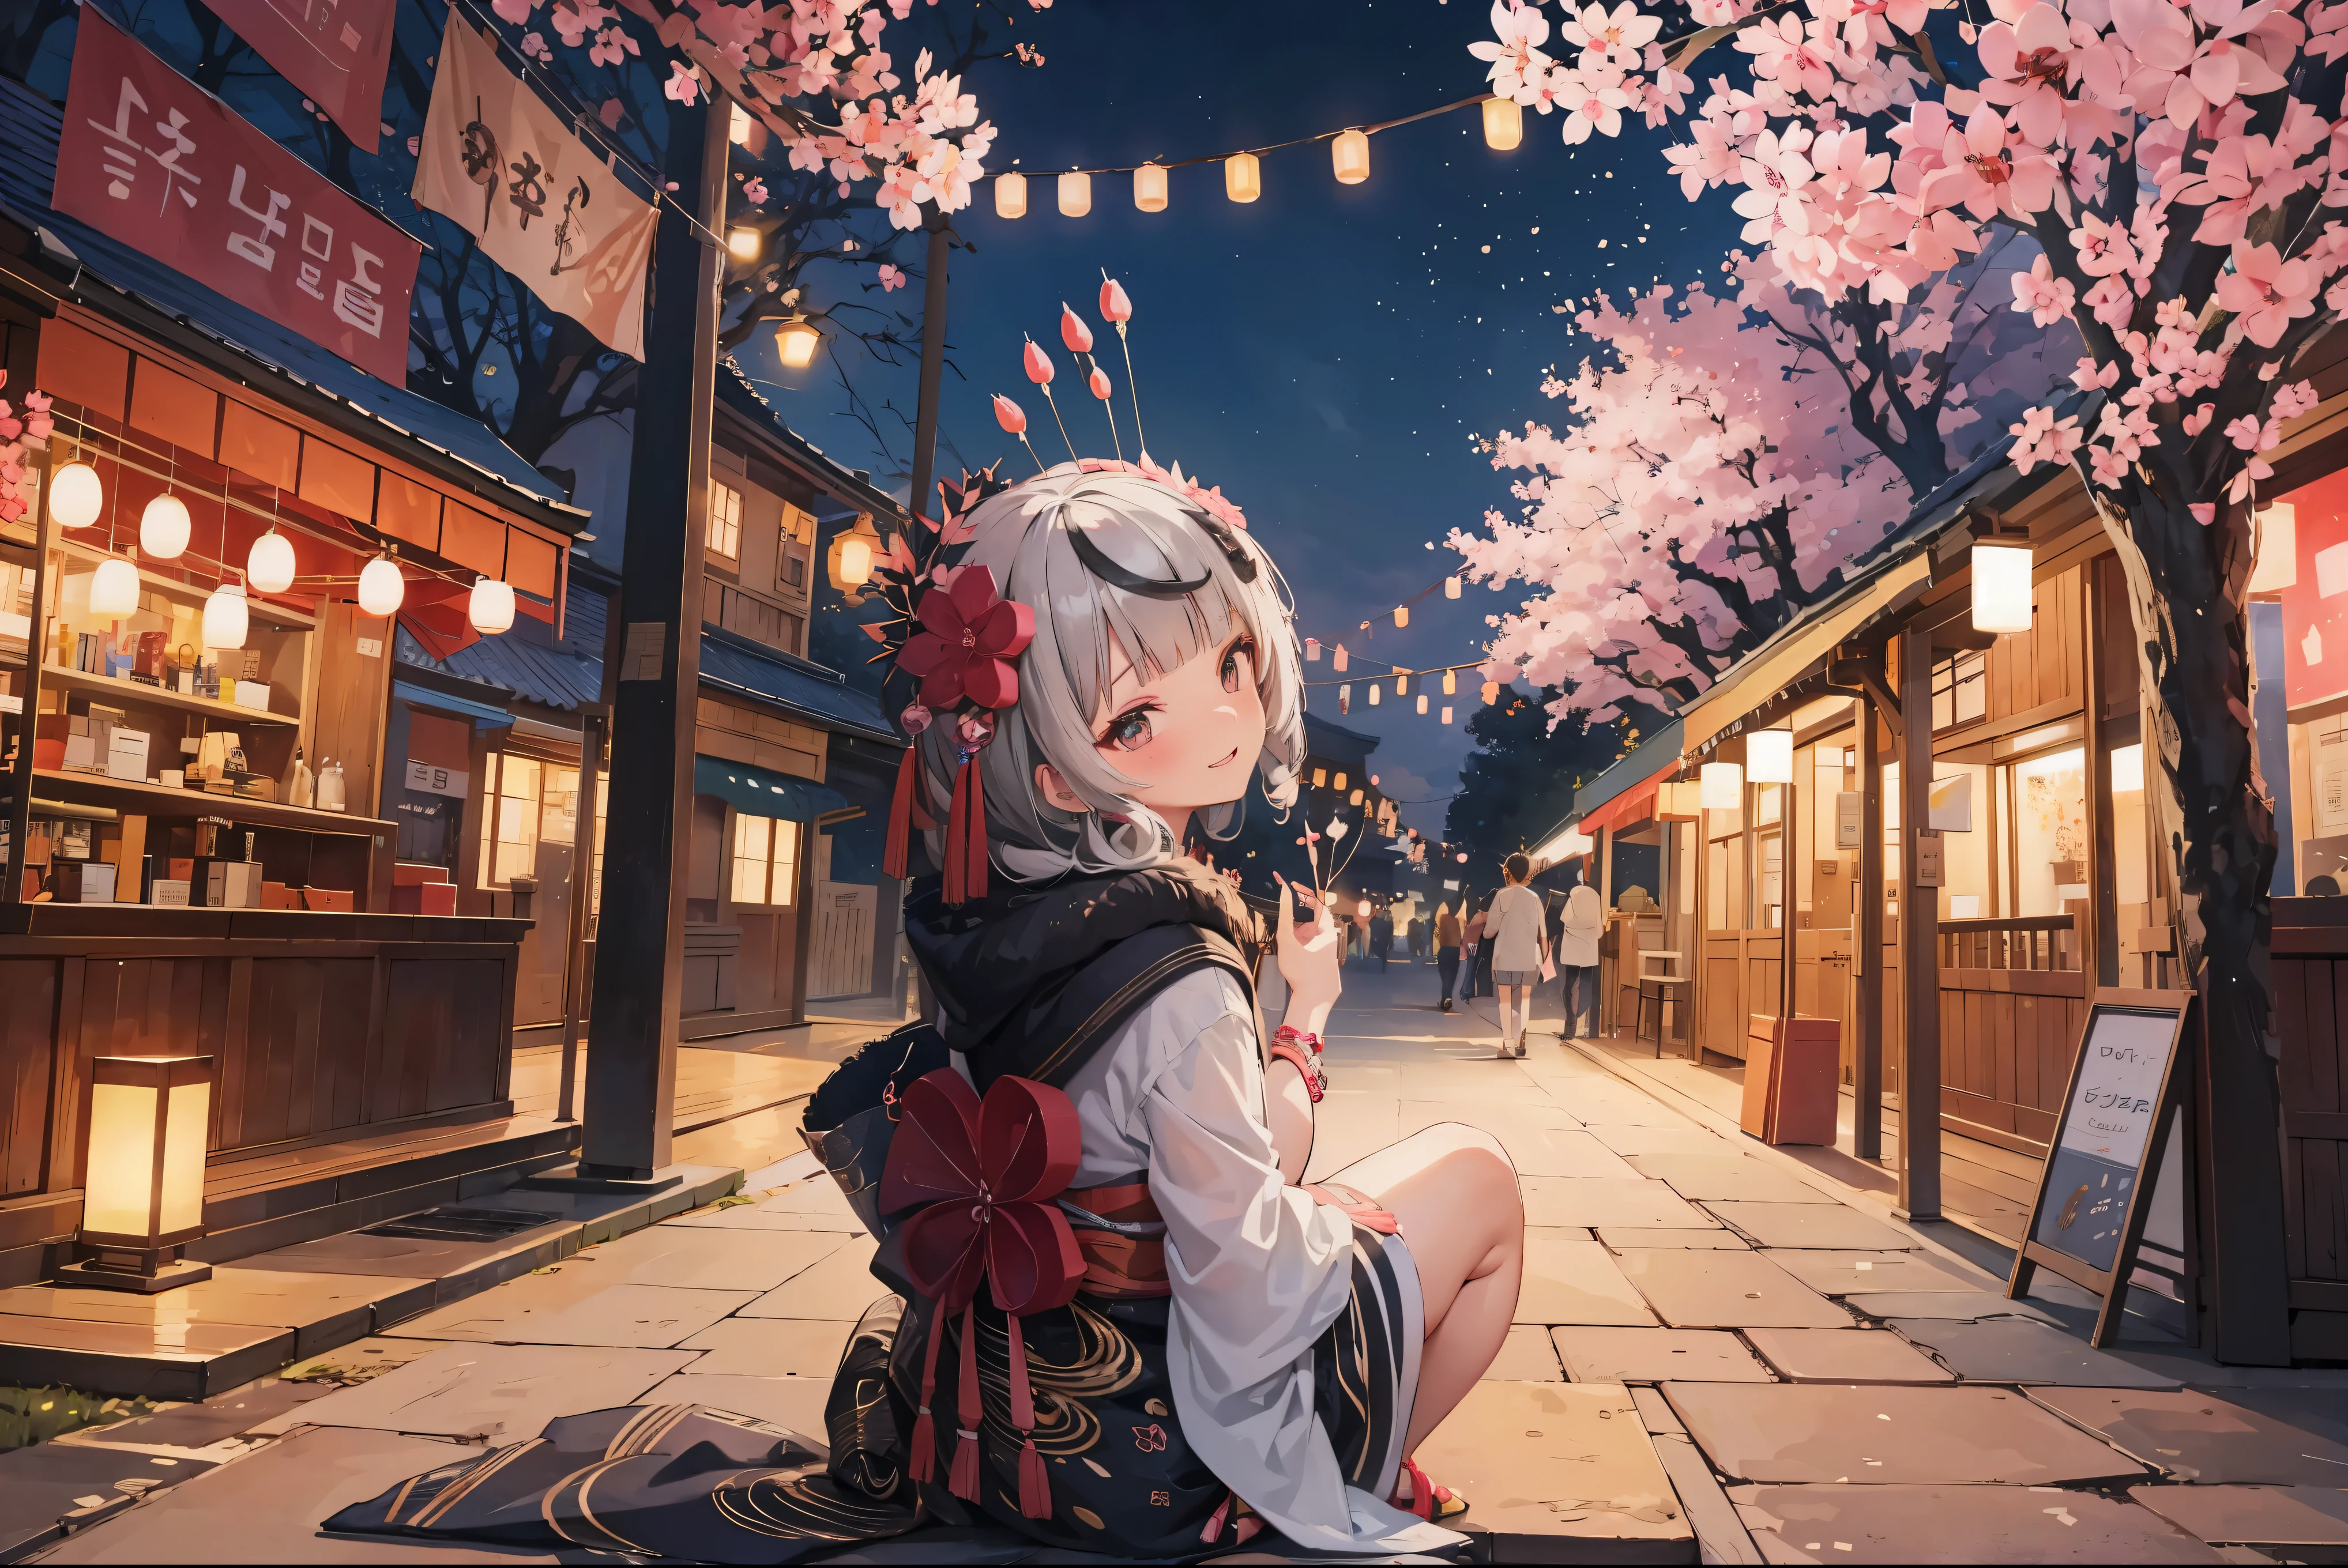 festival, nighttime, floralไฟ, floral, Cherry trees, very happy face, back